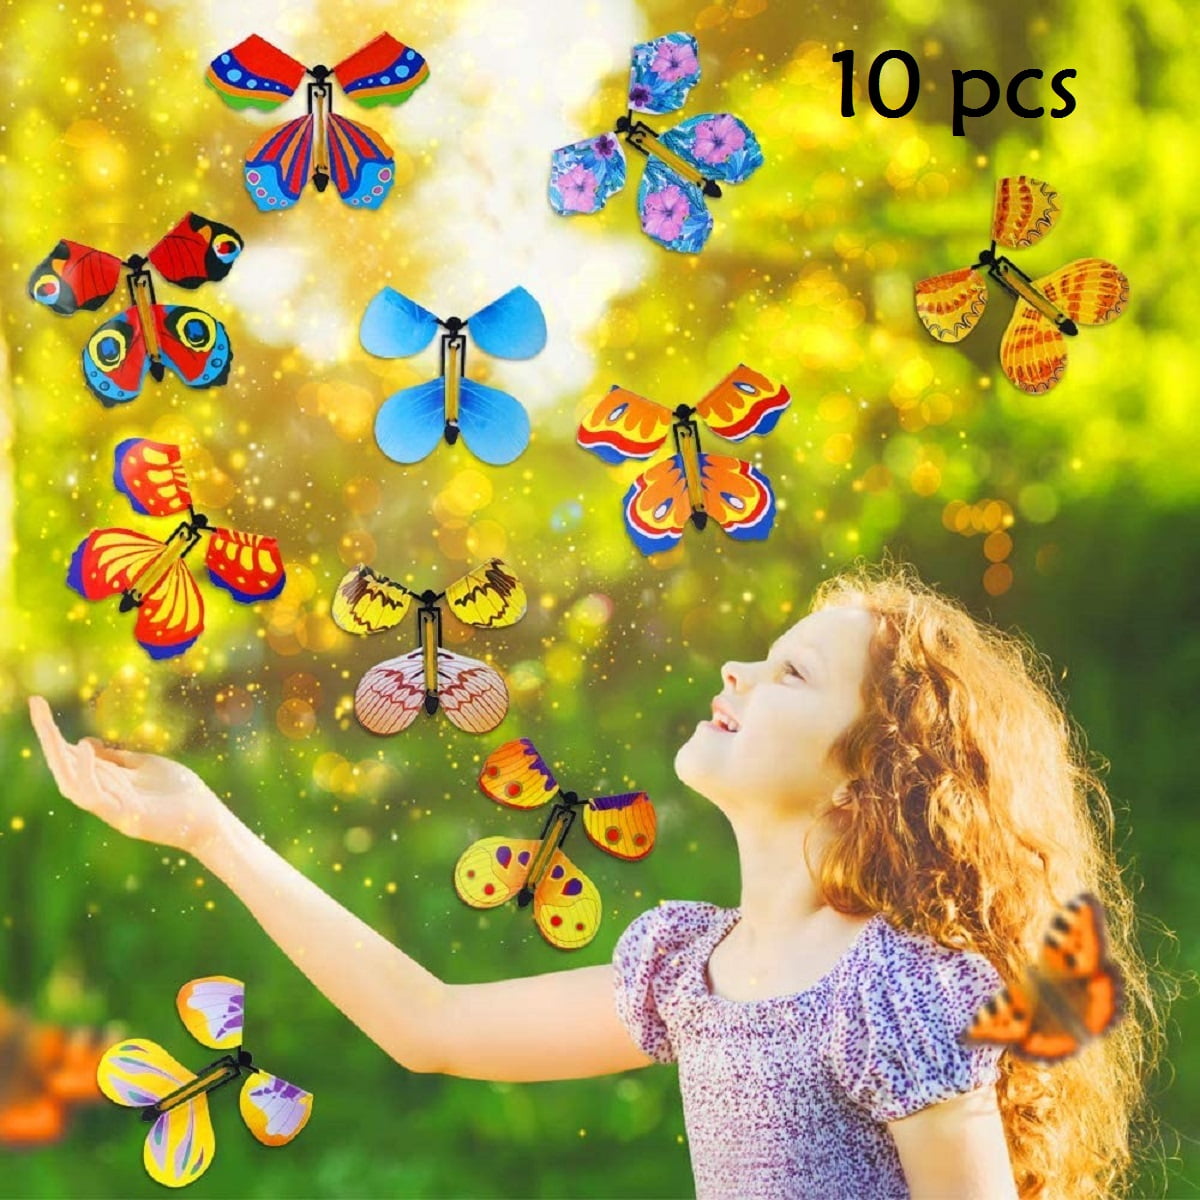 5Pcs Magic Fairy Flying In The Book/Card Butterfly Rubber Band Powered Wind Up Butterfly Toy Great Surprise Wedding Birthday Gift 